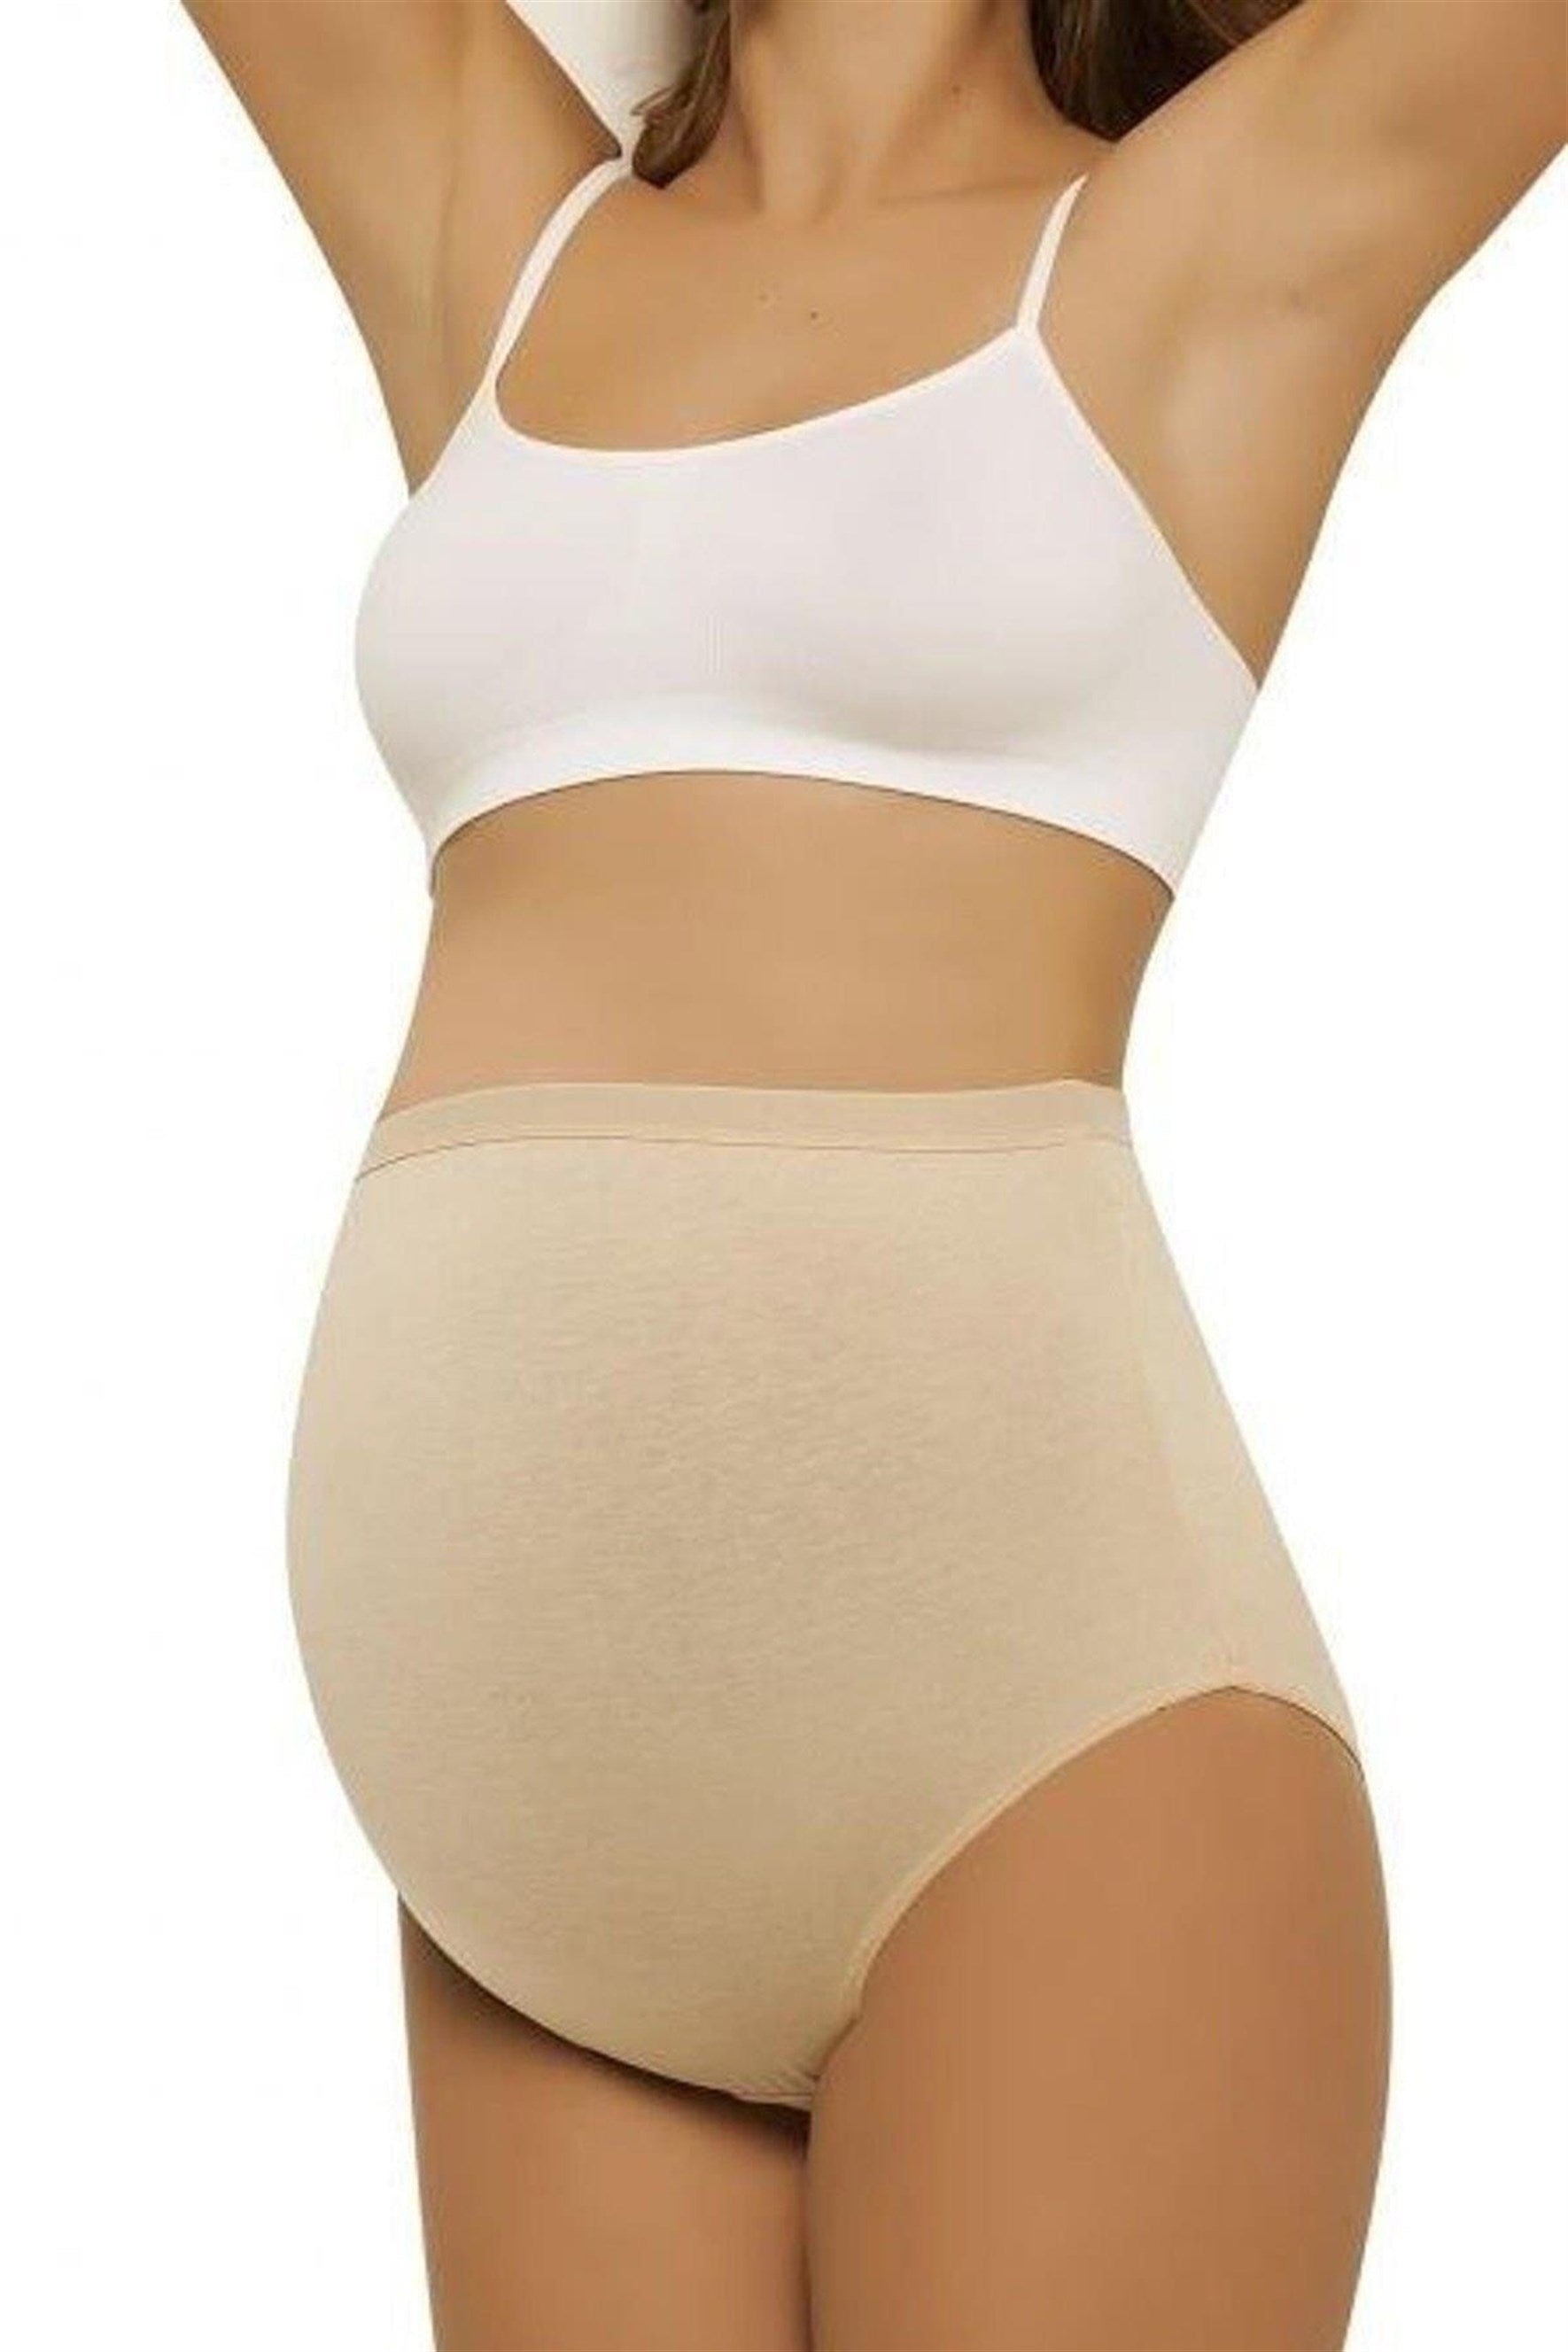 Shopymommy Firming Slip Maternity Panties - 5210